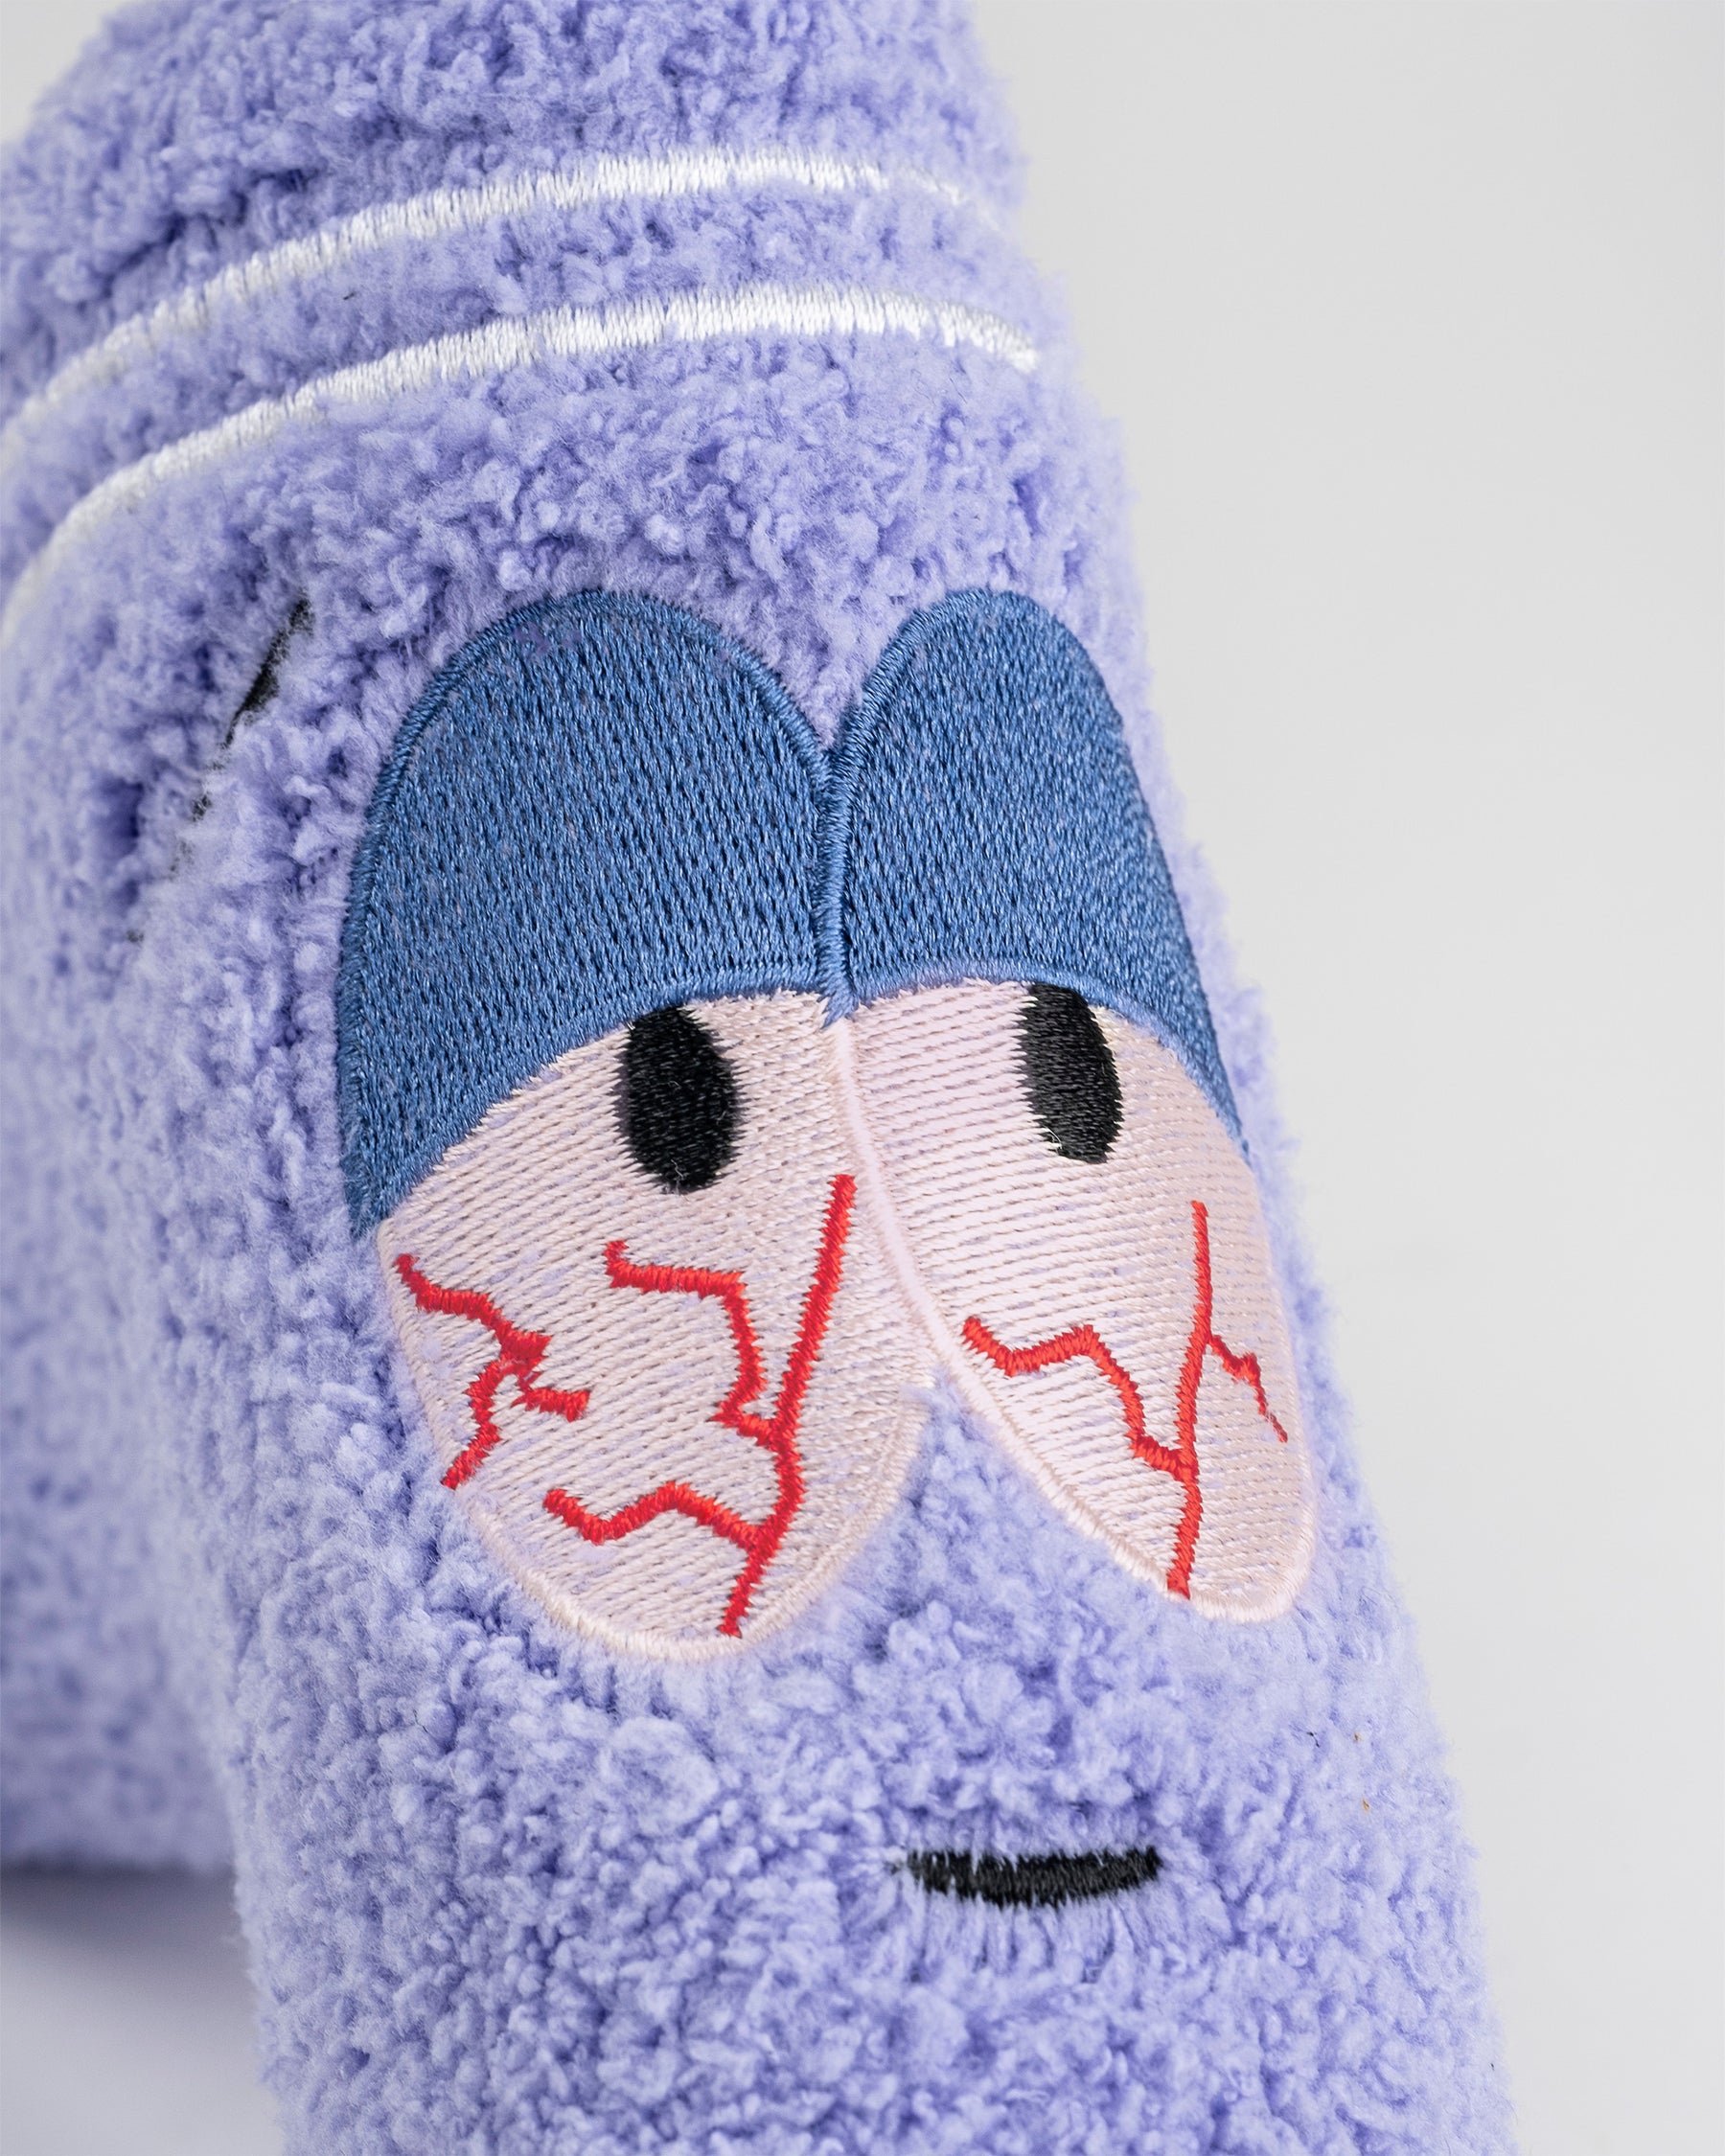 South Park - Towelie Blade Putter Cover